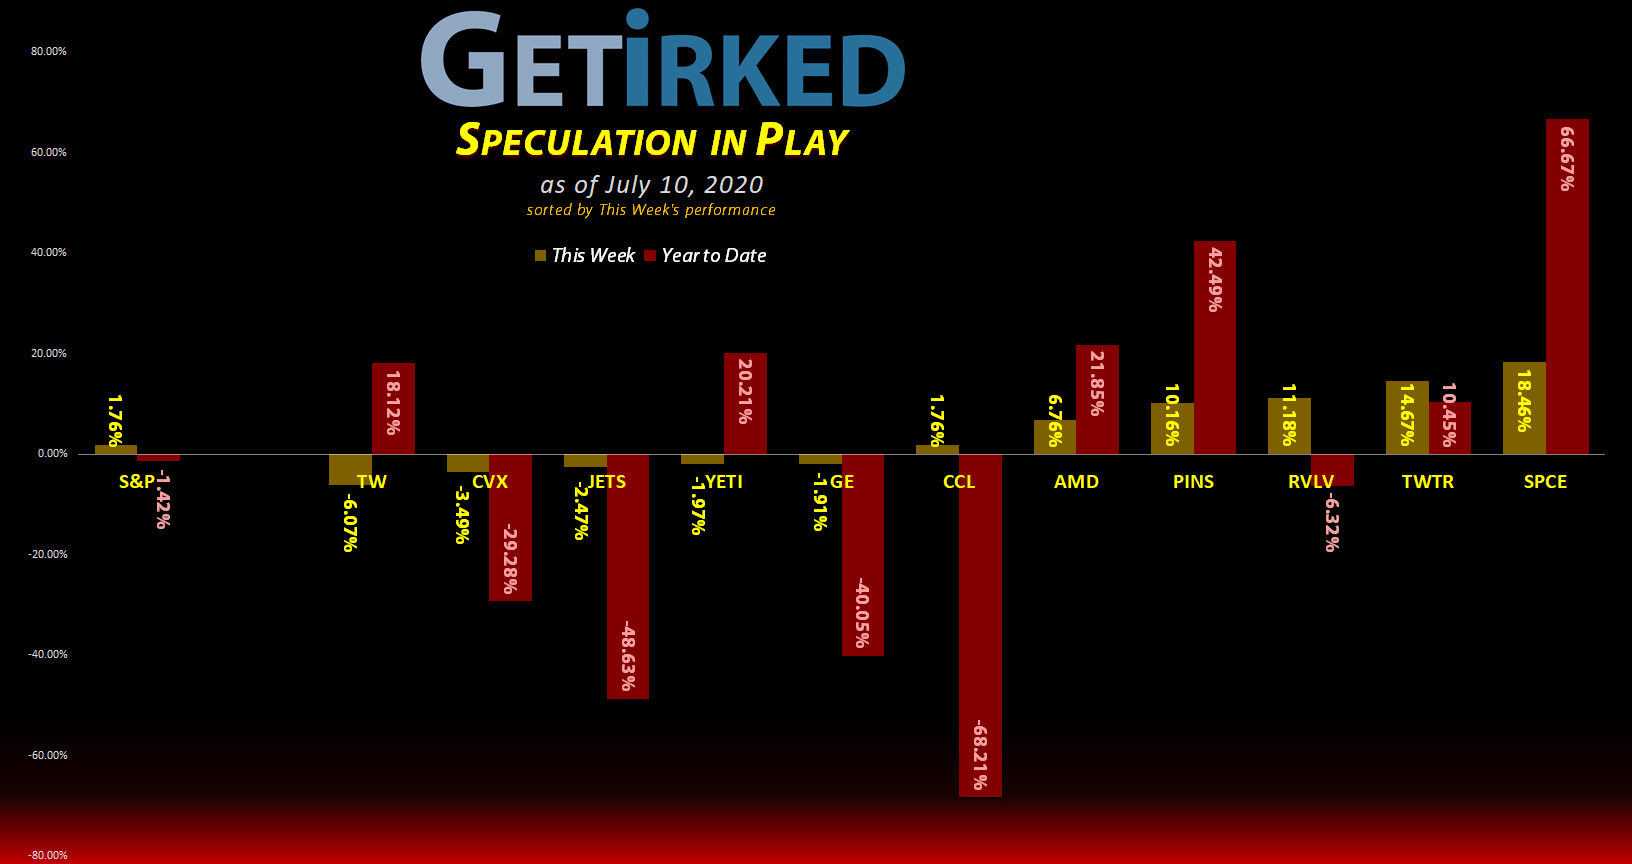 Get Irked's Speculation in Play - July 10, 2020